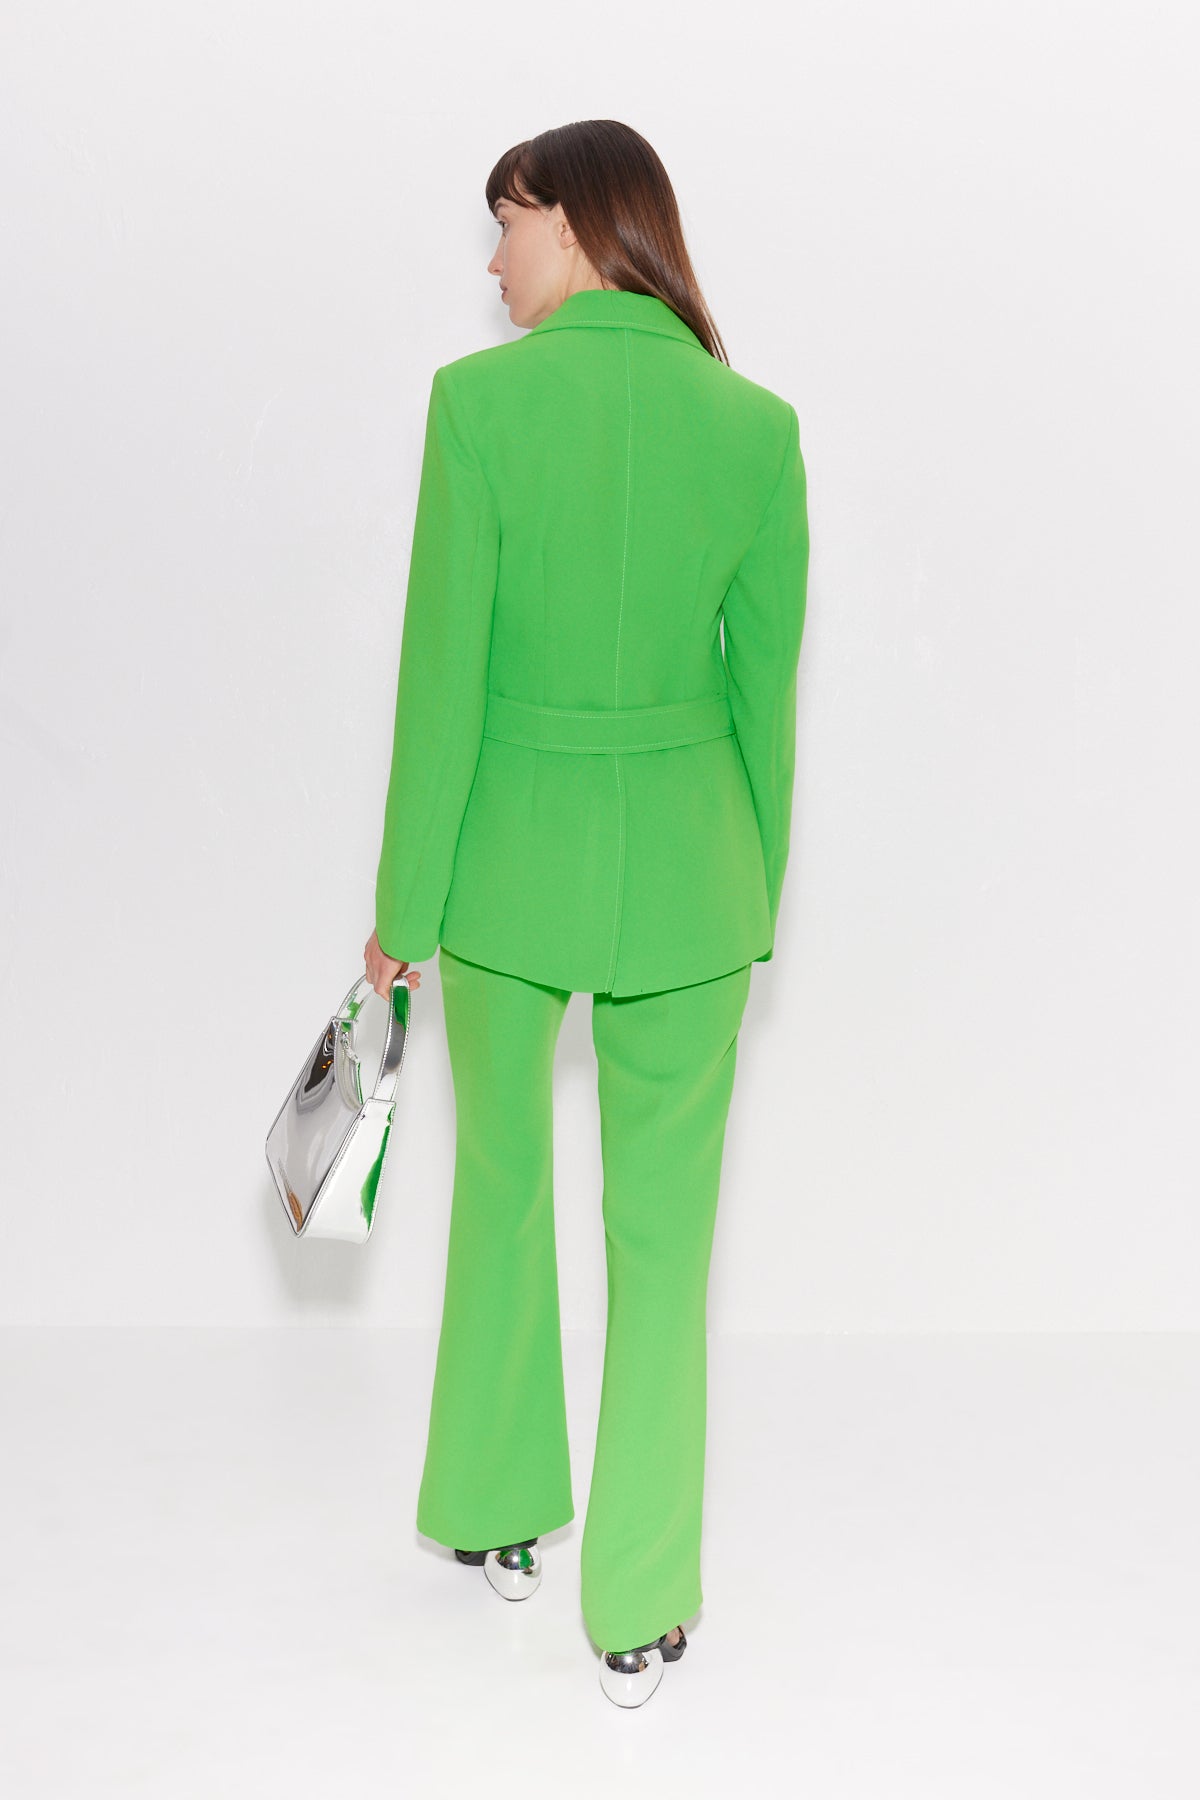 W5217-ZYPRESSE-CREPE-PANT-GUMMY-GREEN-WITH-SNAP-BAG-SILVER-BACK-FULL-BODY-SHOT